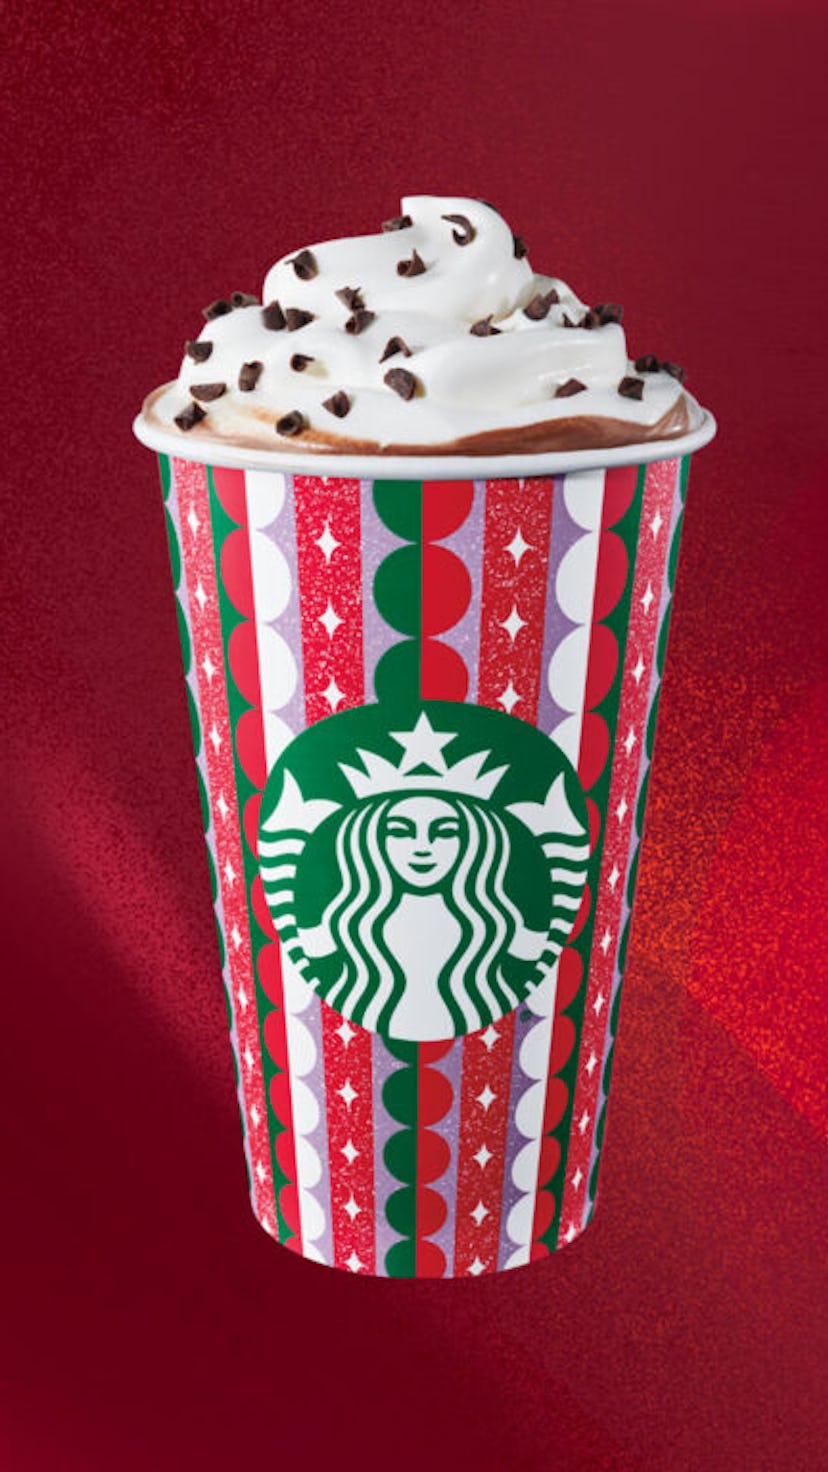 Starbucks' holiday 2021 drinks include the returning Peppermint Mocha.